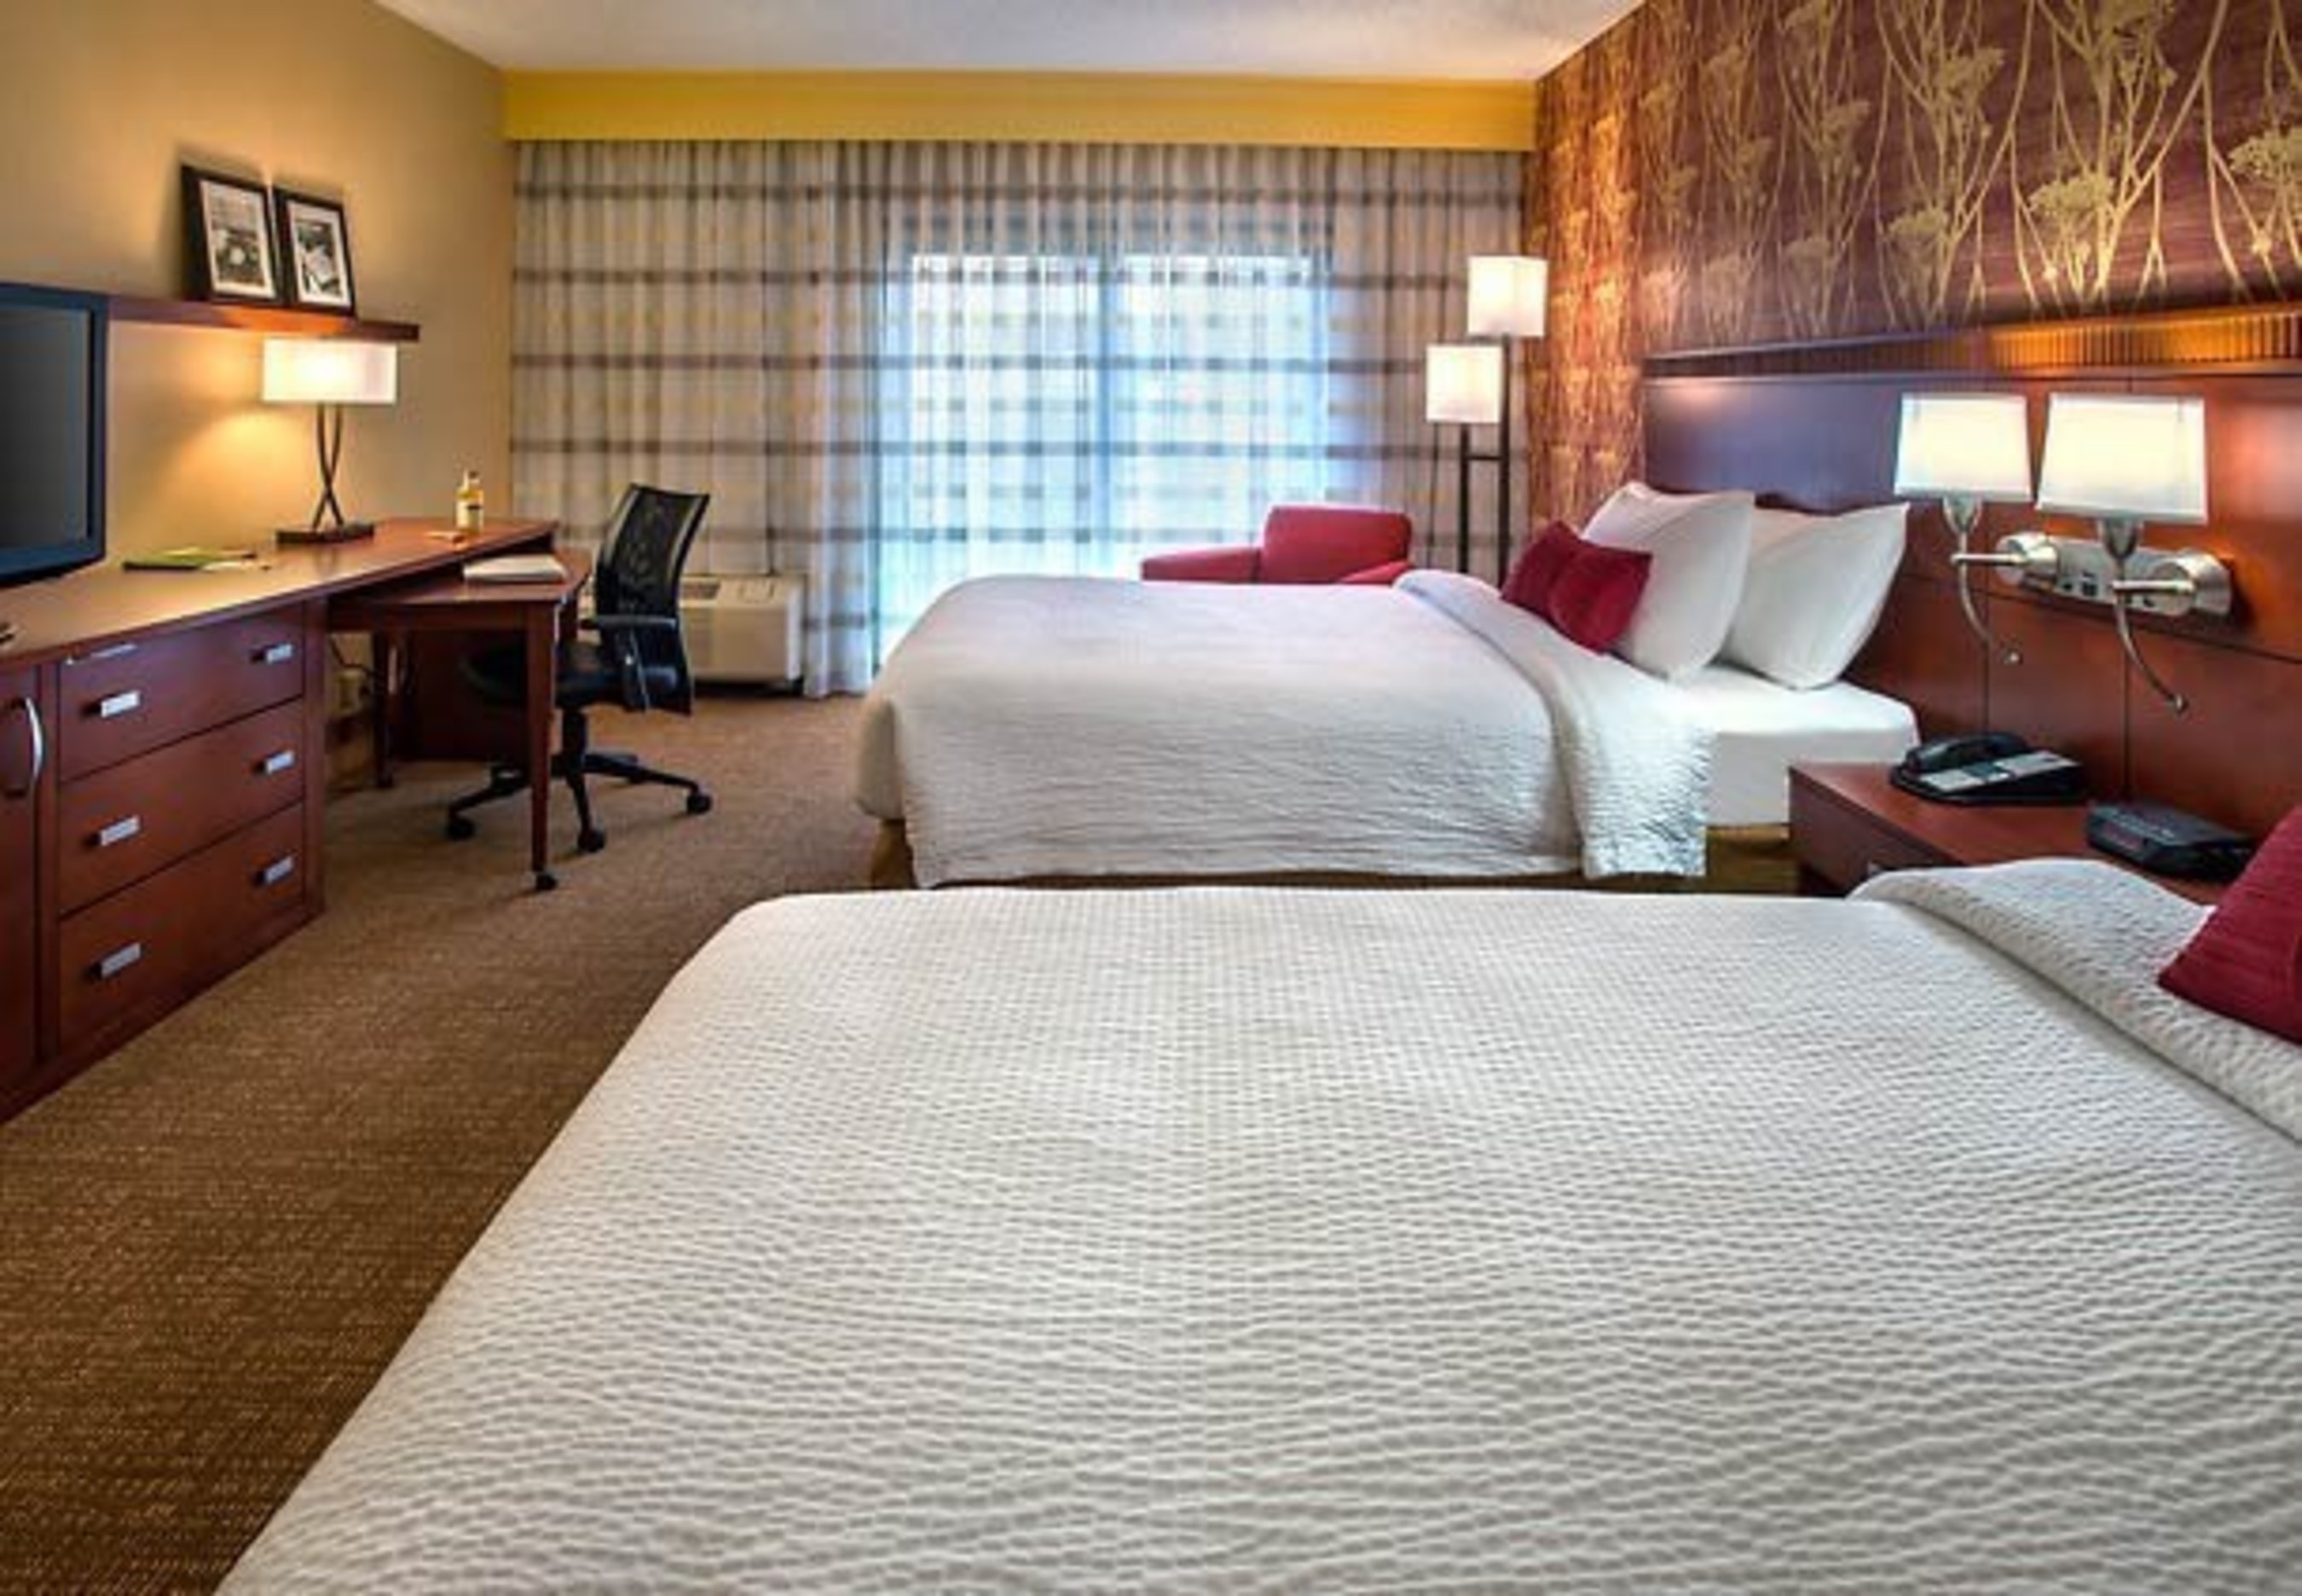 Families, schools and teams traveling for sports this season will find budget-conscious accommodations at Courtyard Philadelphia Devon, near the city center and local sports arenas. For information on special group rates for sports travelers, contact Rebecca Kammeyer at rebecca.kammeyer@marriott.com or call 1-610-687-6633.